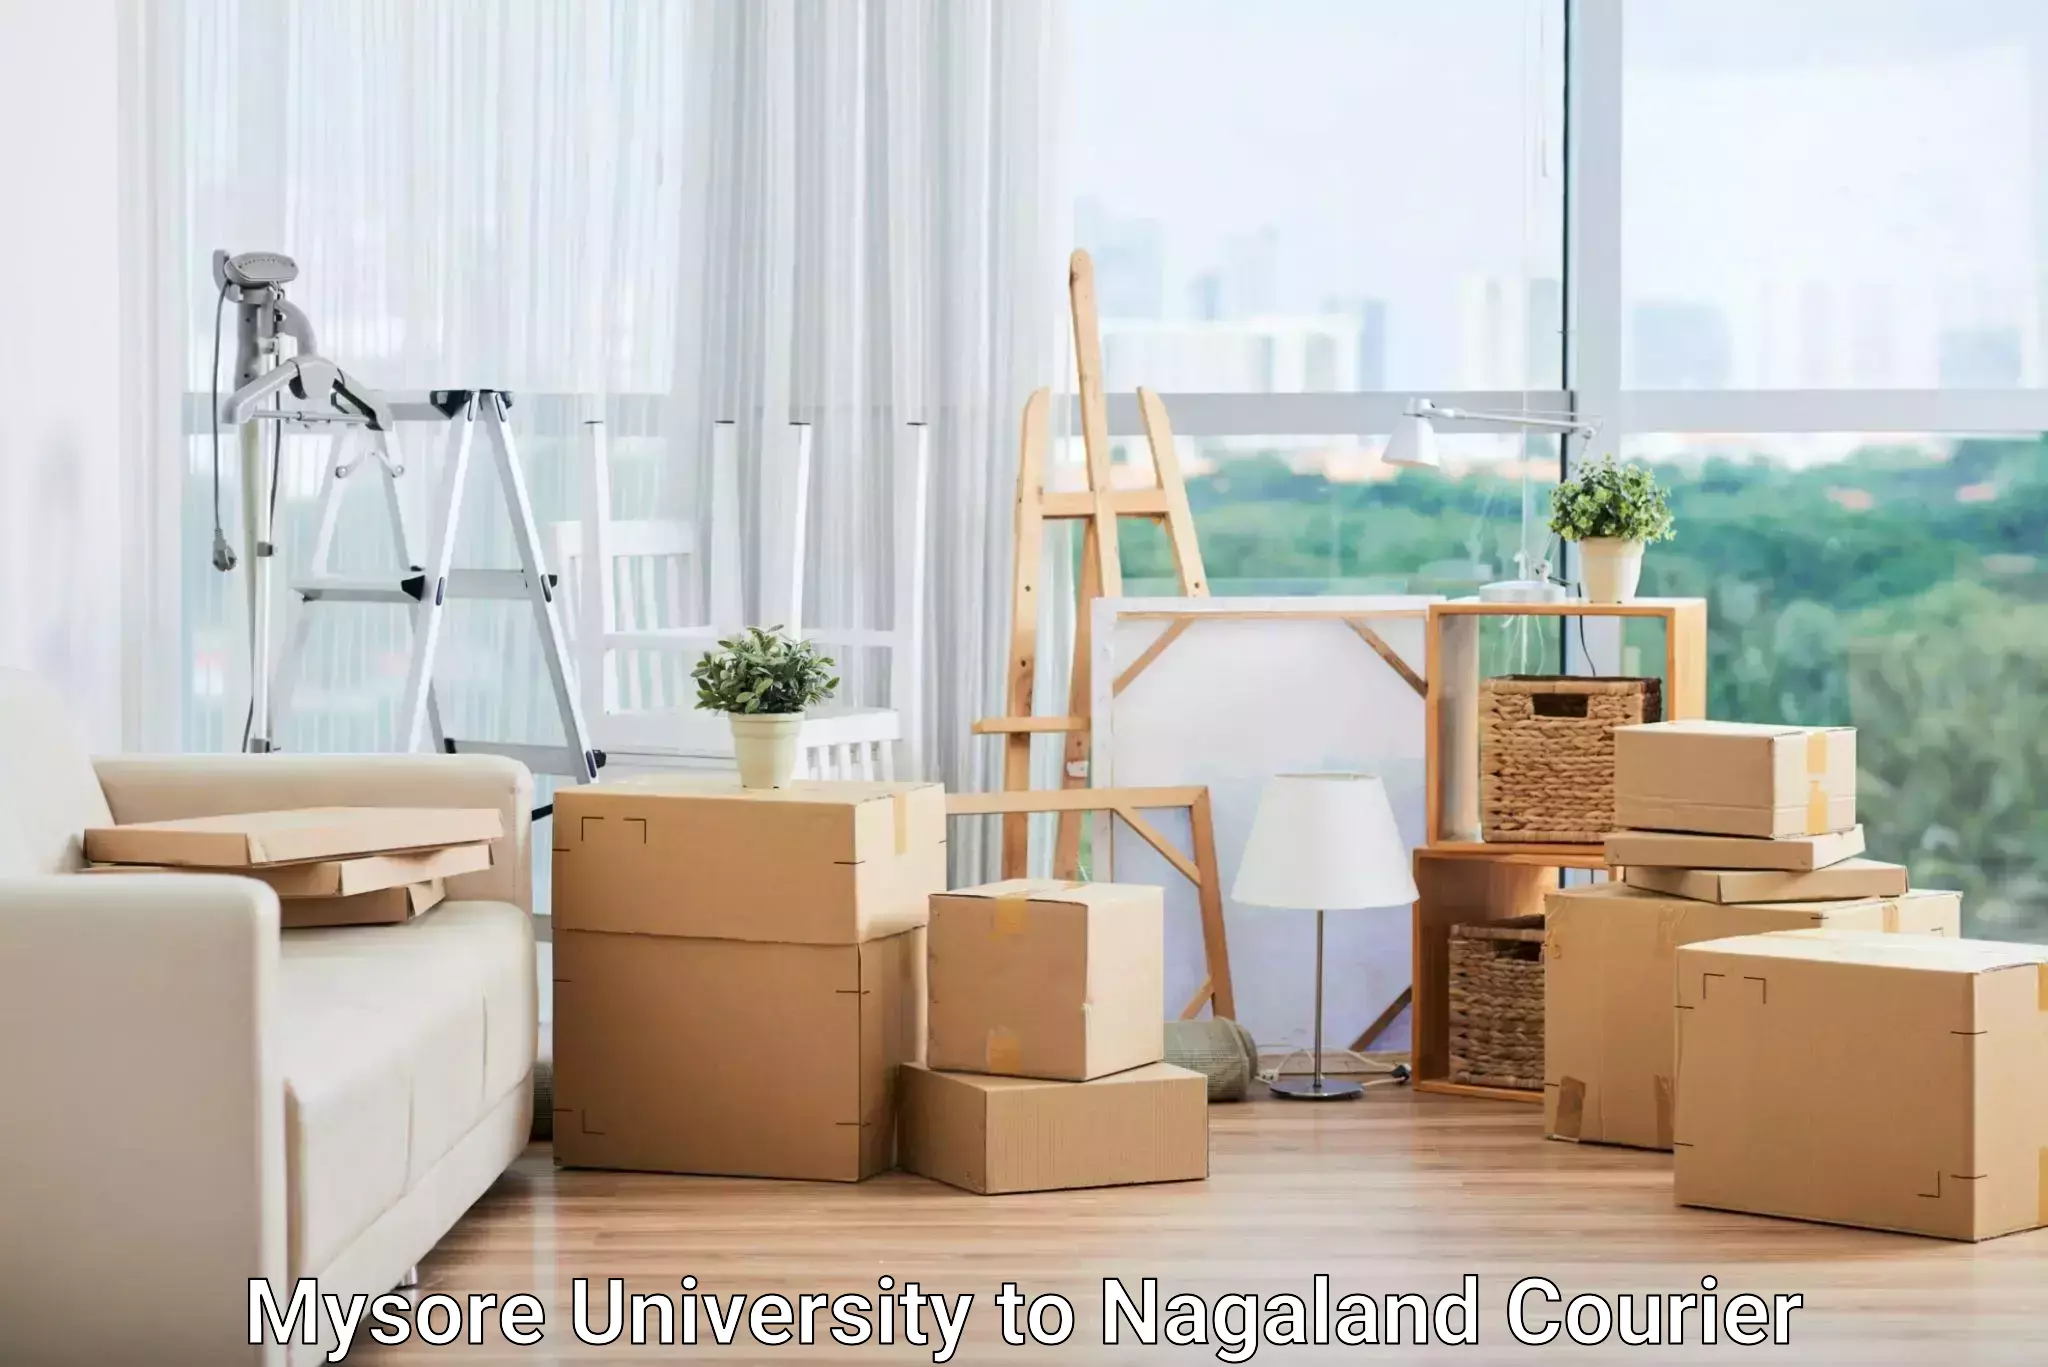 Secure package delivery Mysore University to Nagaland